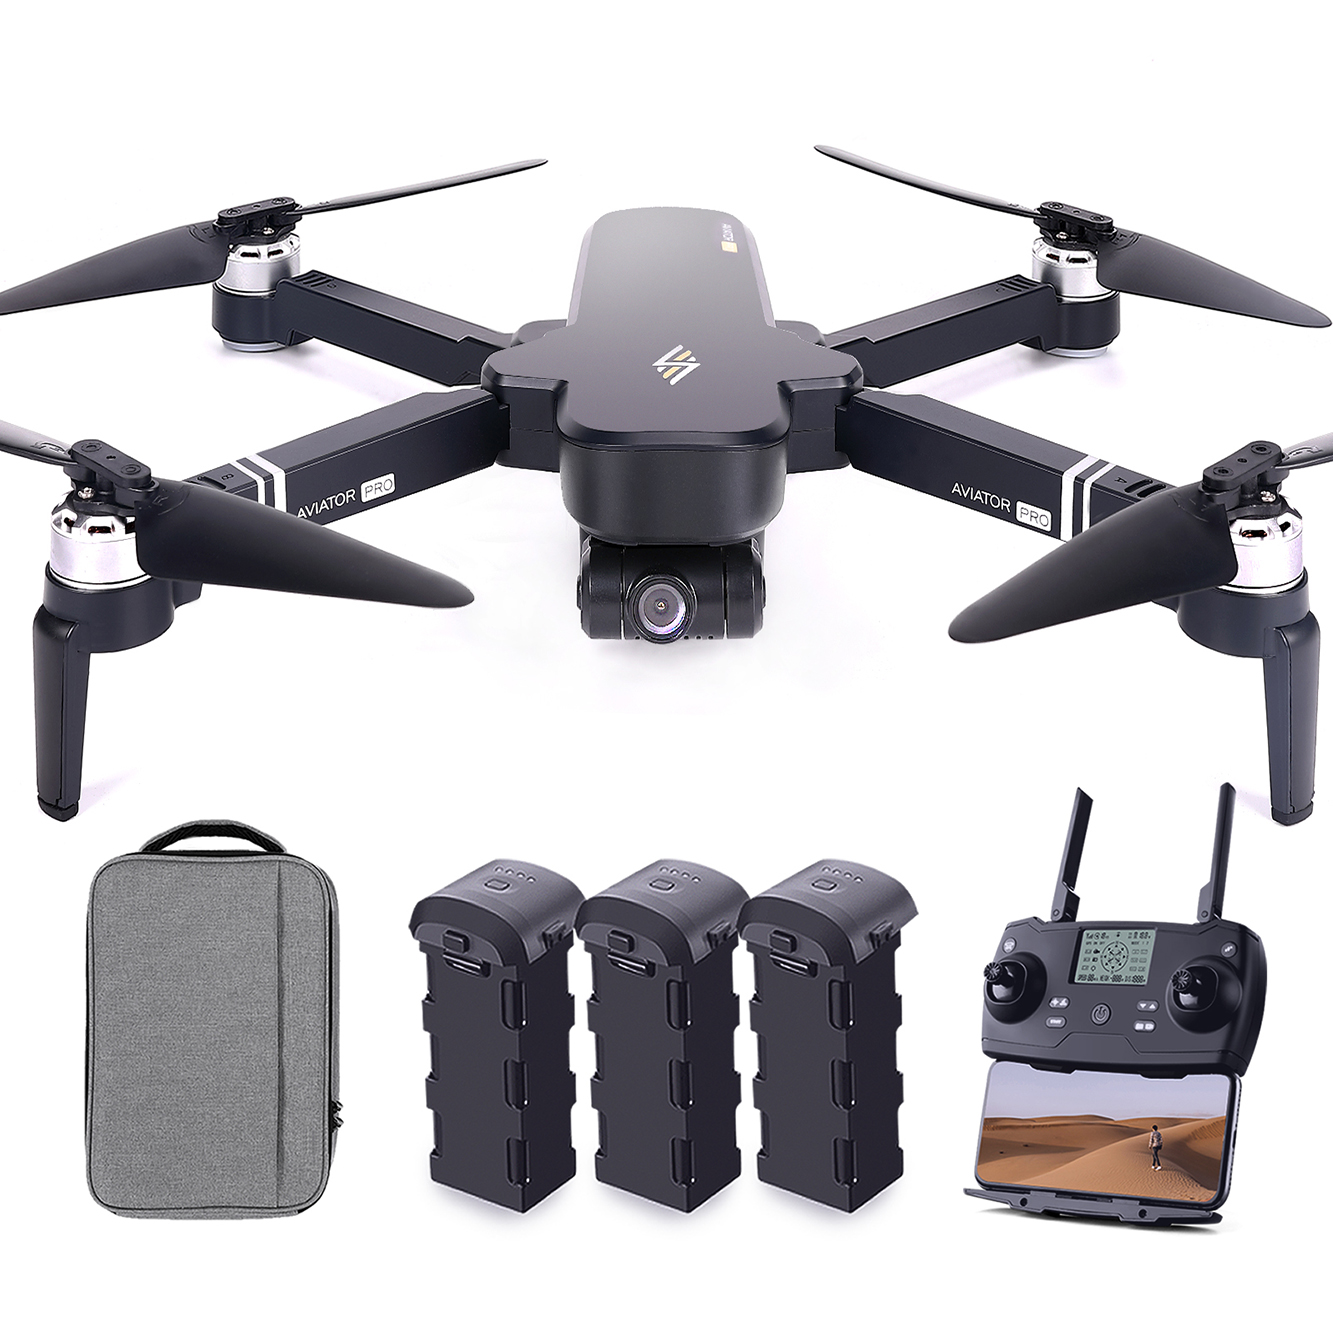 CHUBORY X11 Pro GPS Drones with 90+ Mins long flight time , 3-axis Gimbal drones with camera for Adults 4K UHD Camera Anti-shake, GPS Auto Return Home Brushless Motor All Functions Drones for Beginners/Professionals (3 Batteries+Bag)